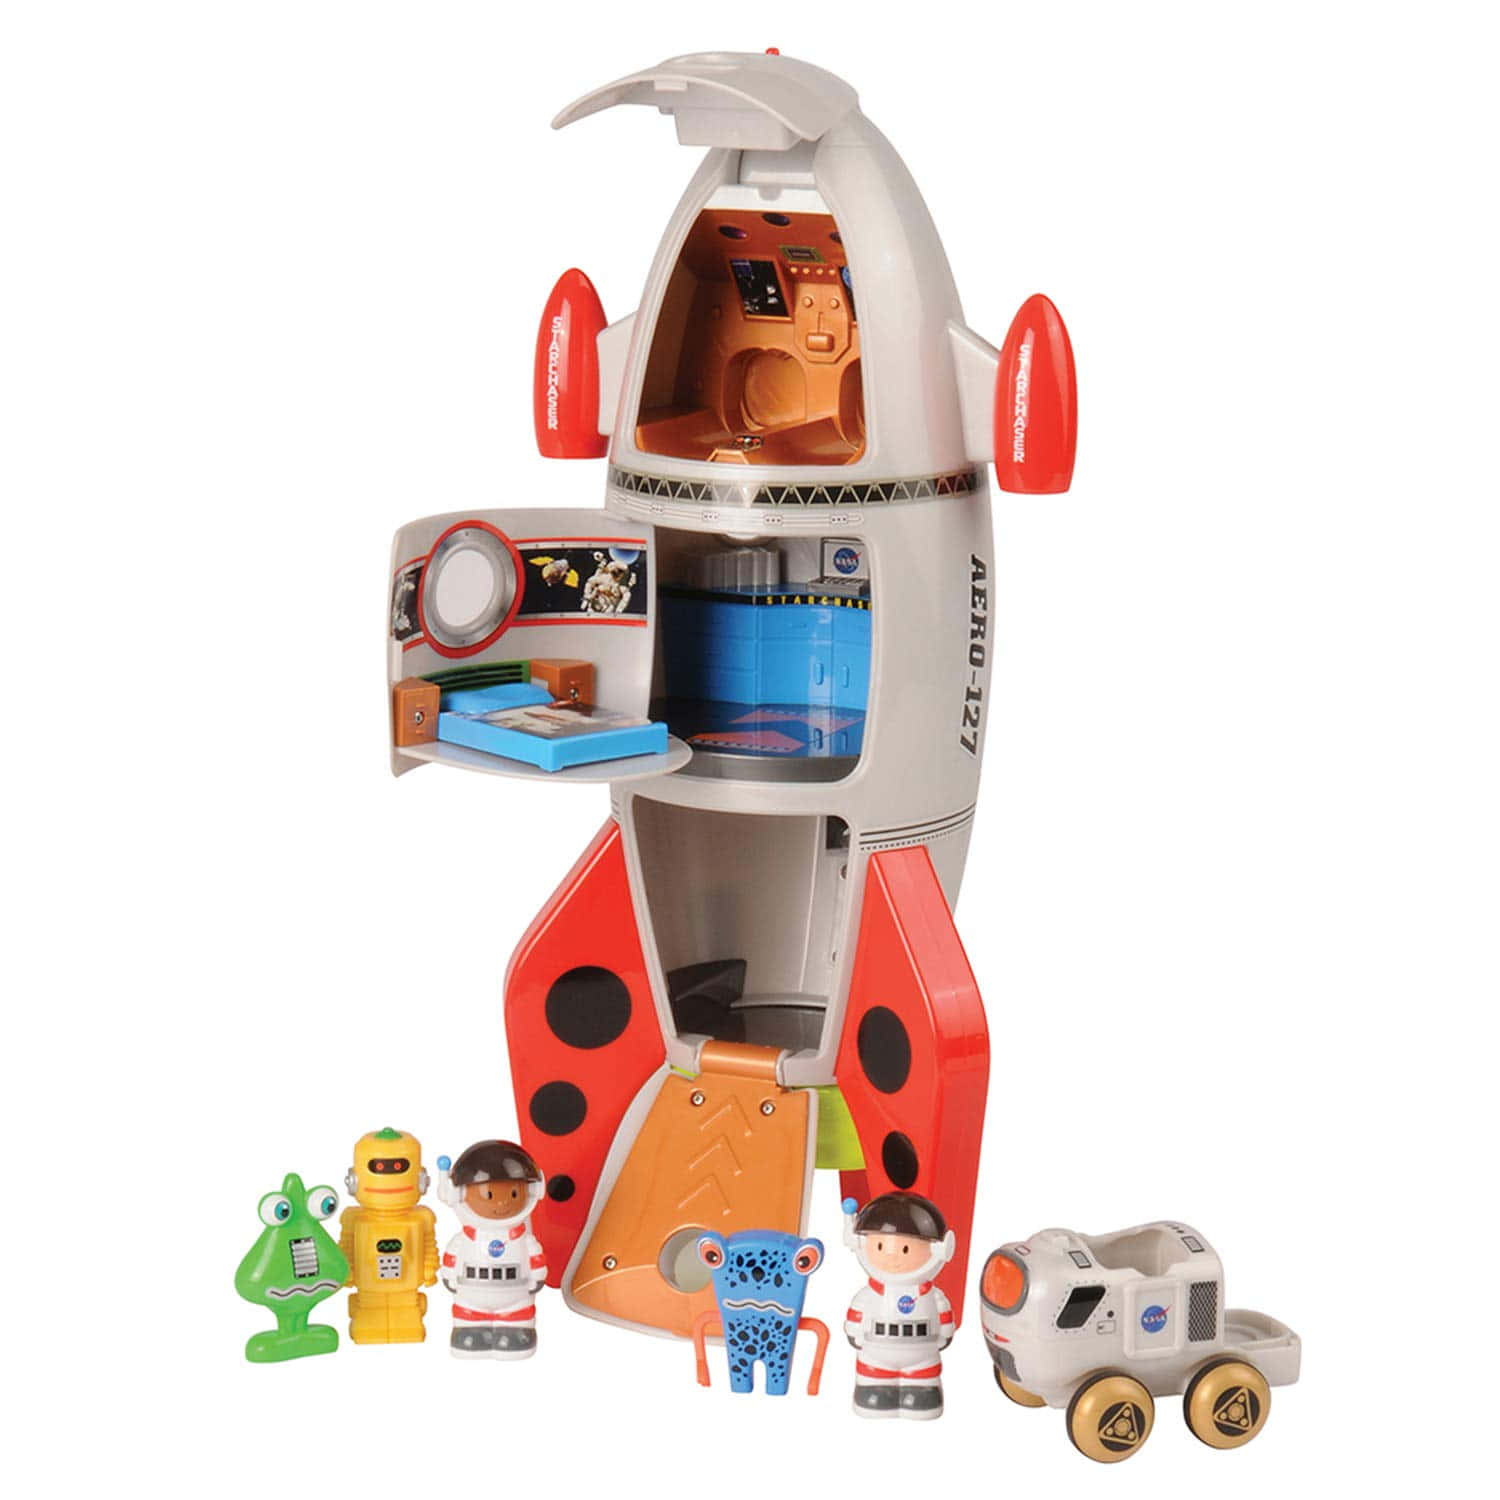 A Toy Rocket Ship With Toys And A Car